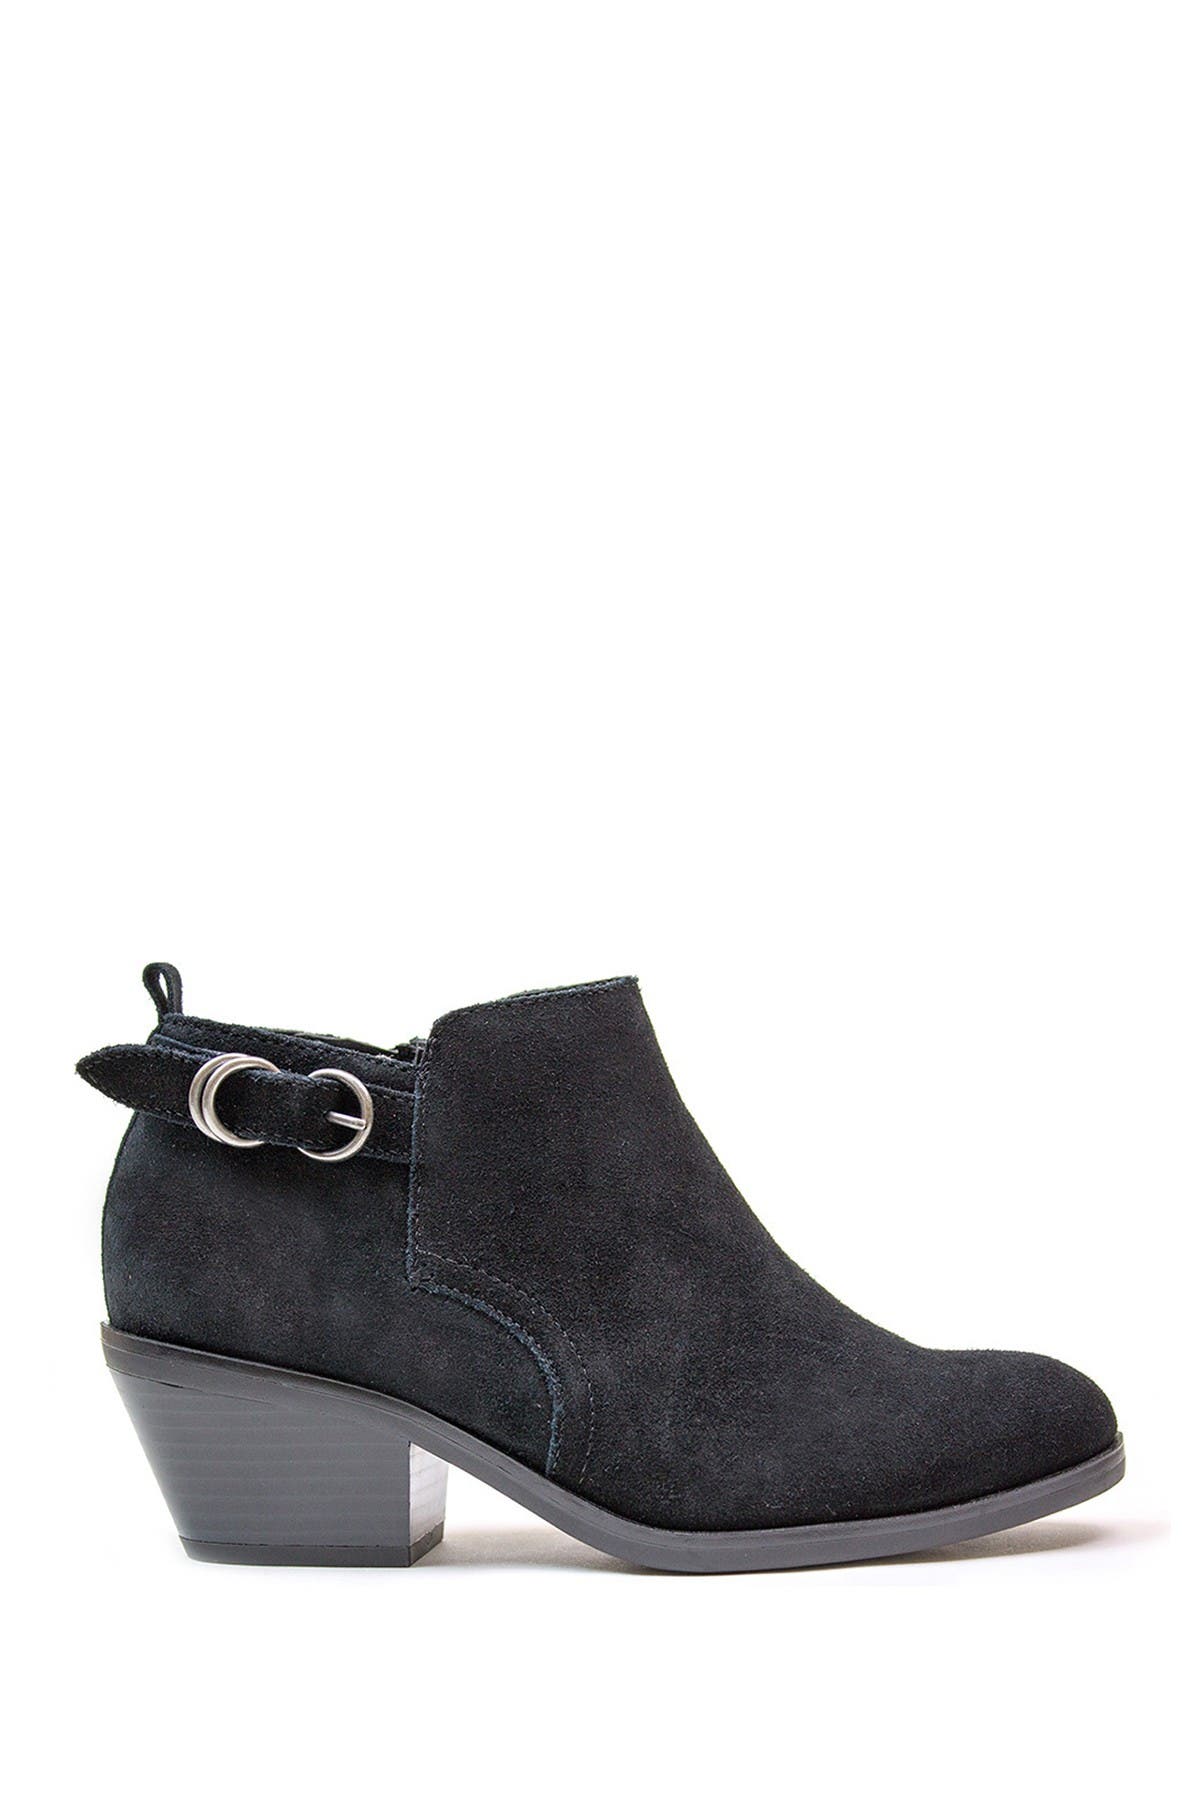 White Mountain Footwear Sadie Suede Ankle Bootie In Oxford7